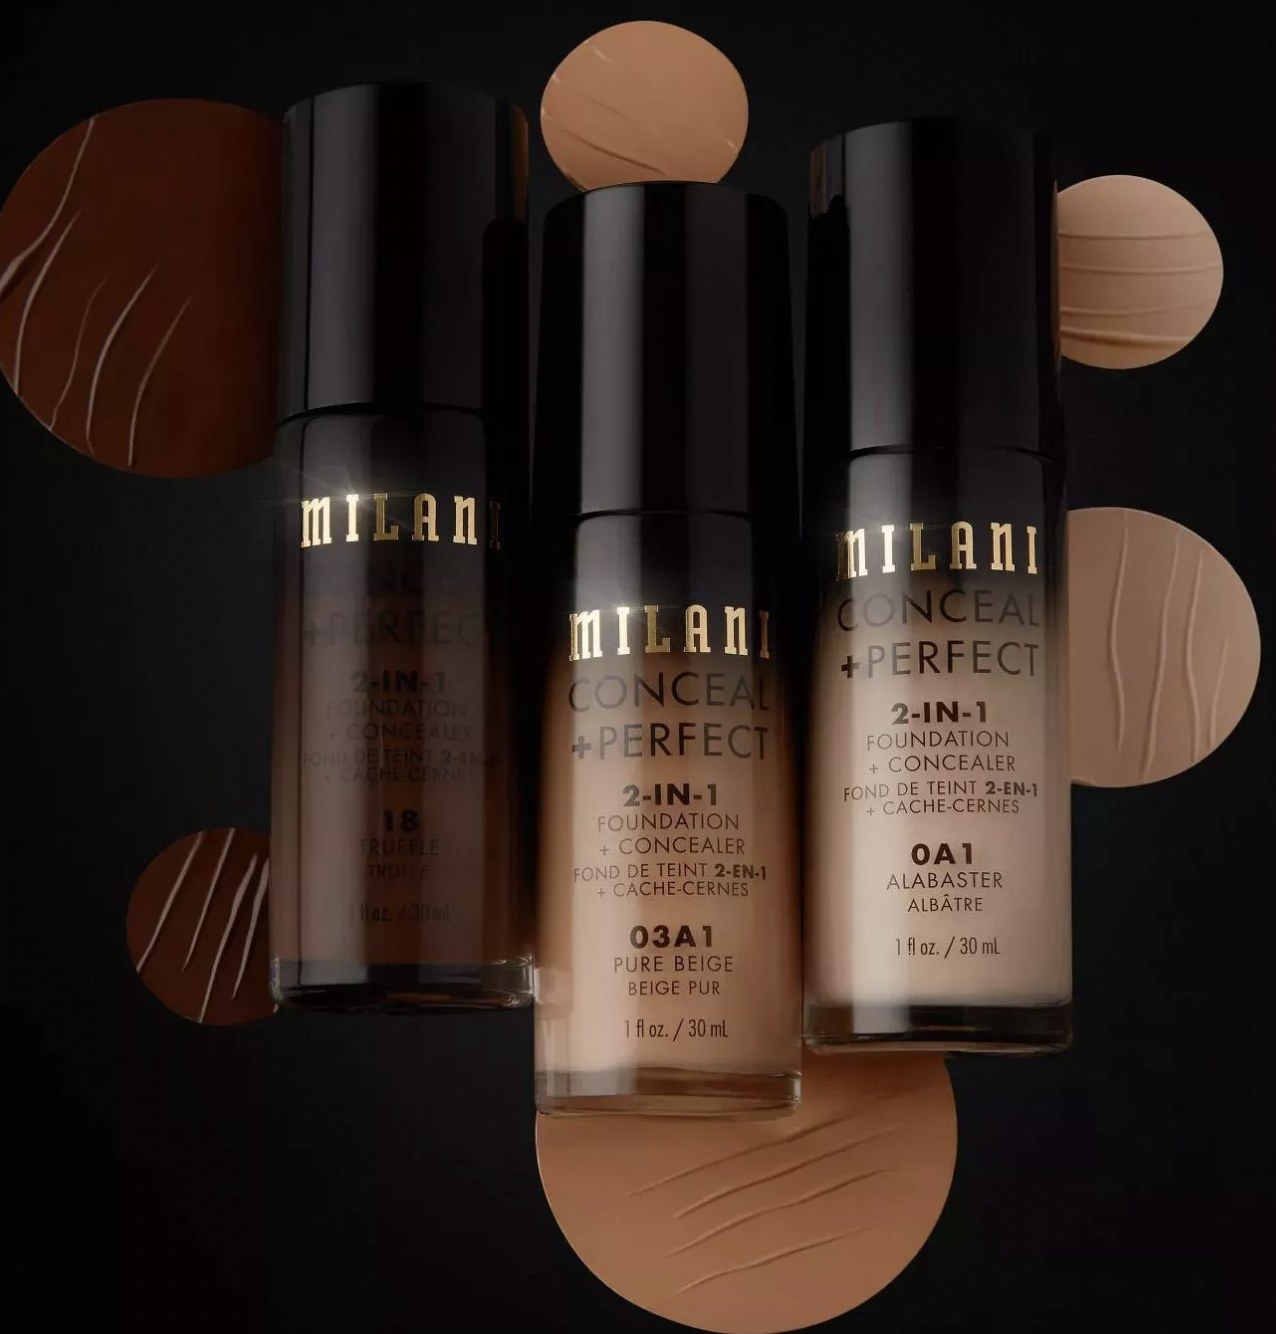 A set of three foundation and concealer bottles in one